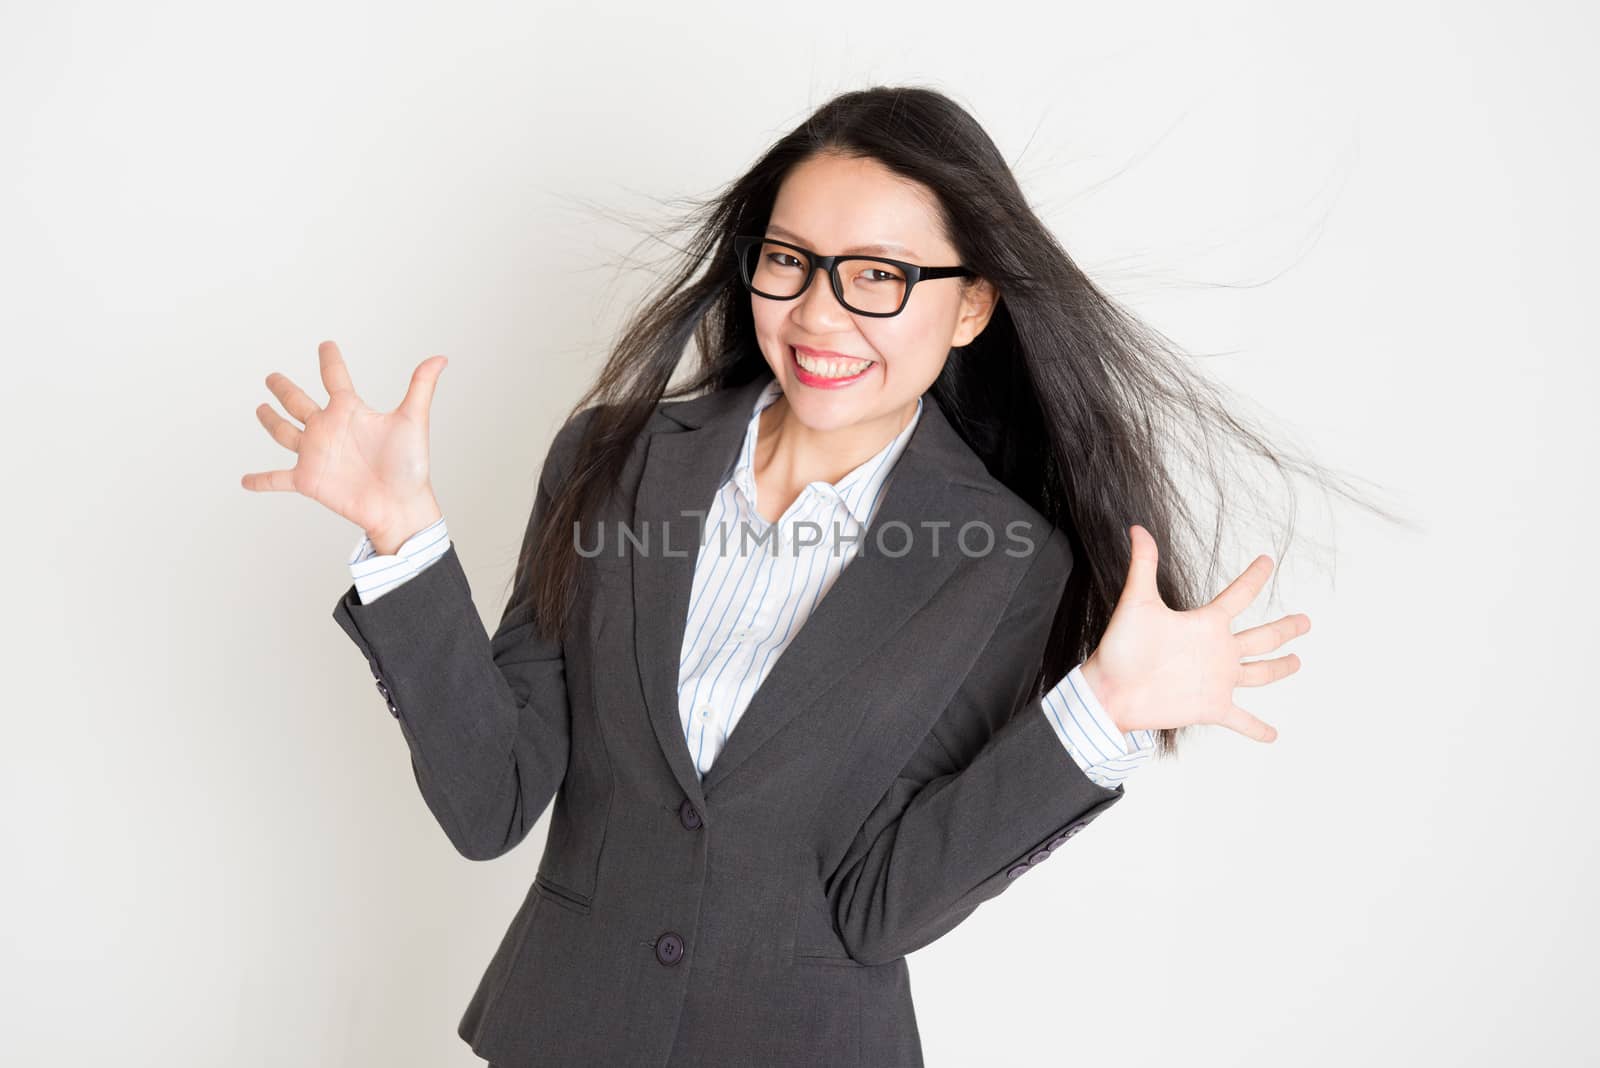 Portrait of happy Asian businesswoman in formalwear smiling and palms open, standing on plain background.